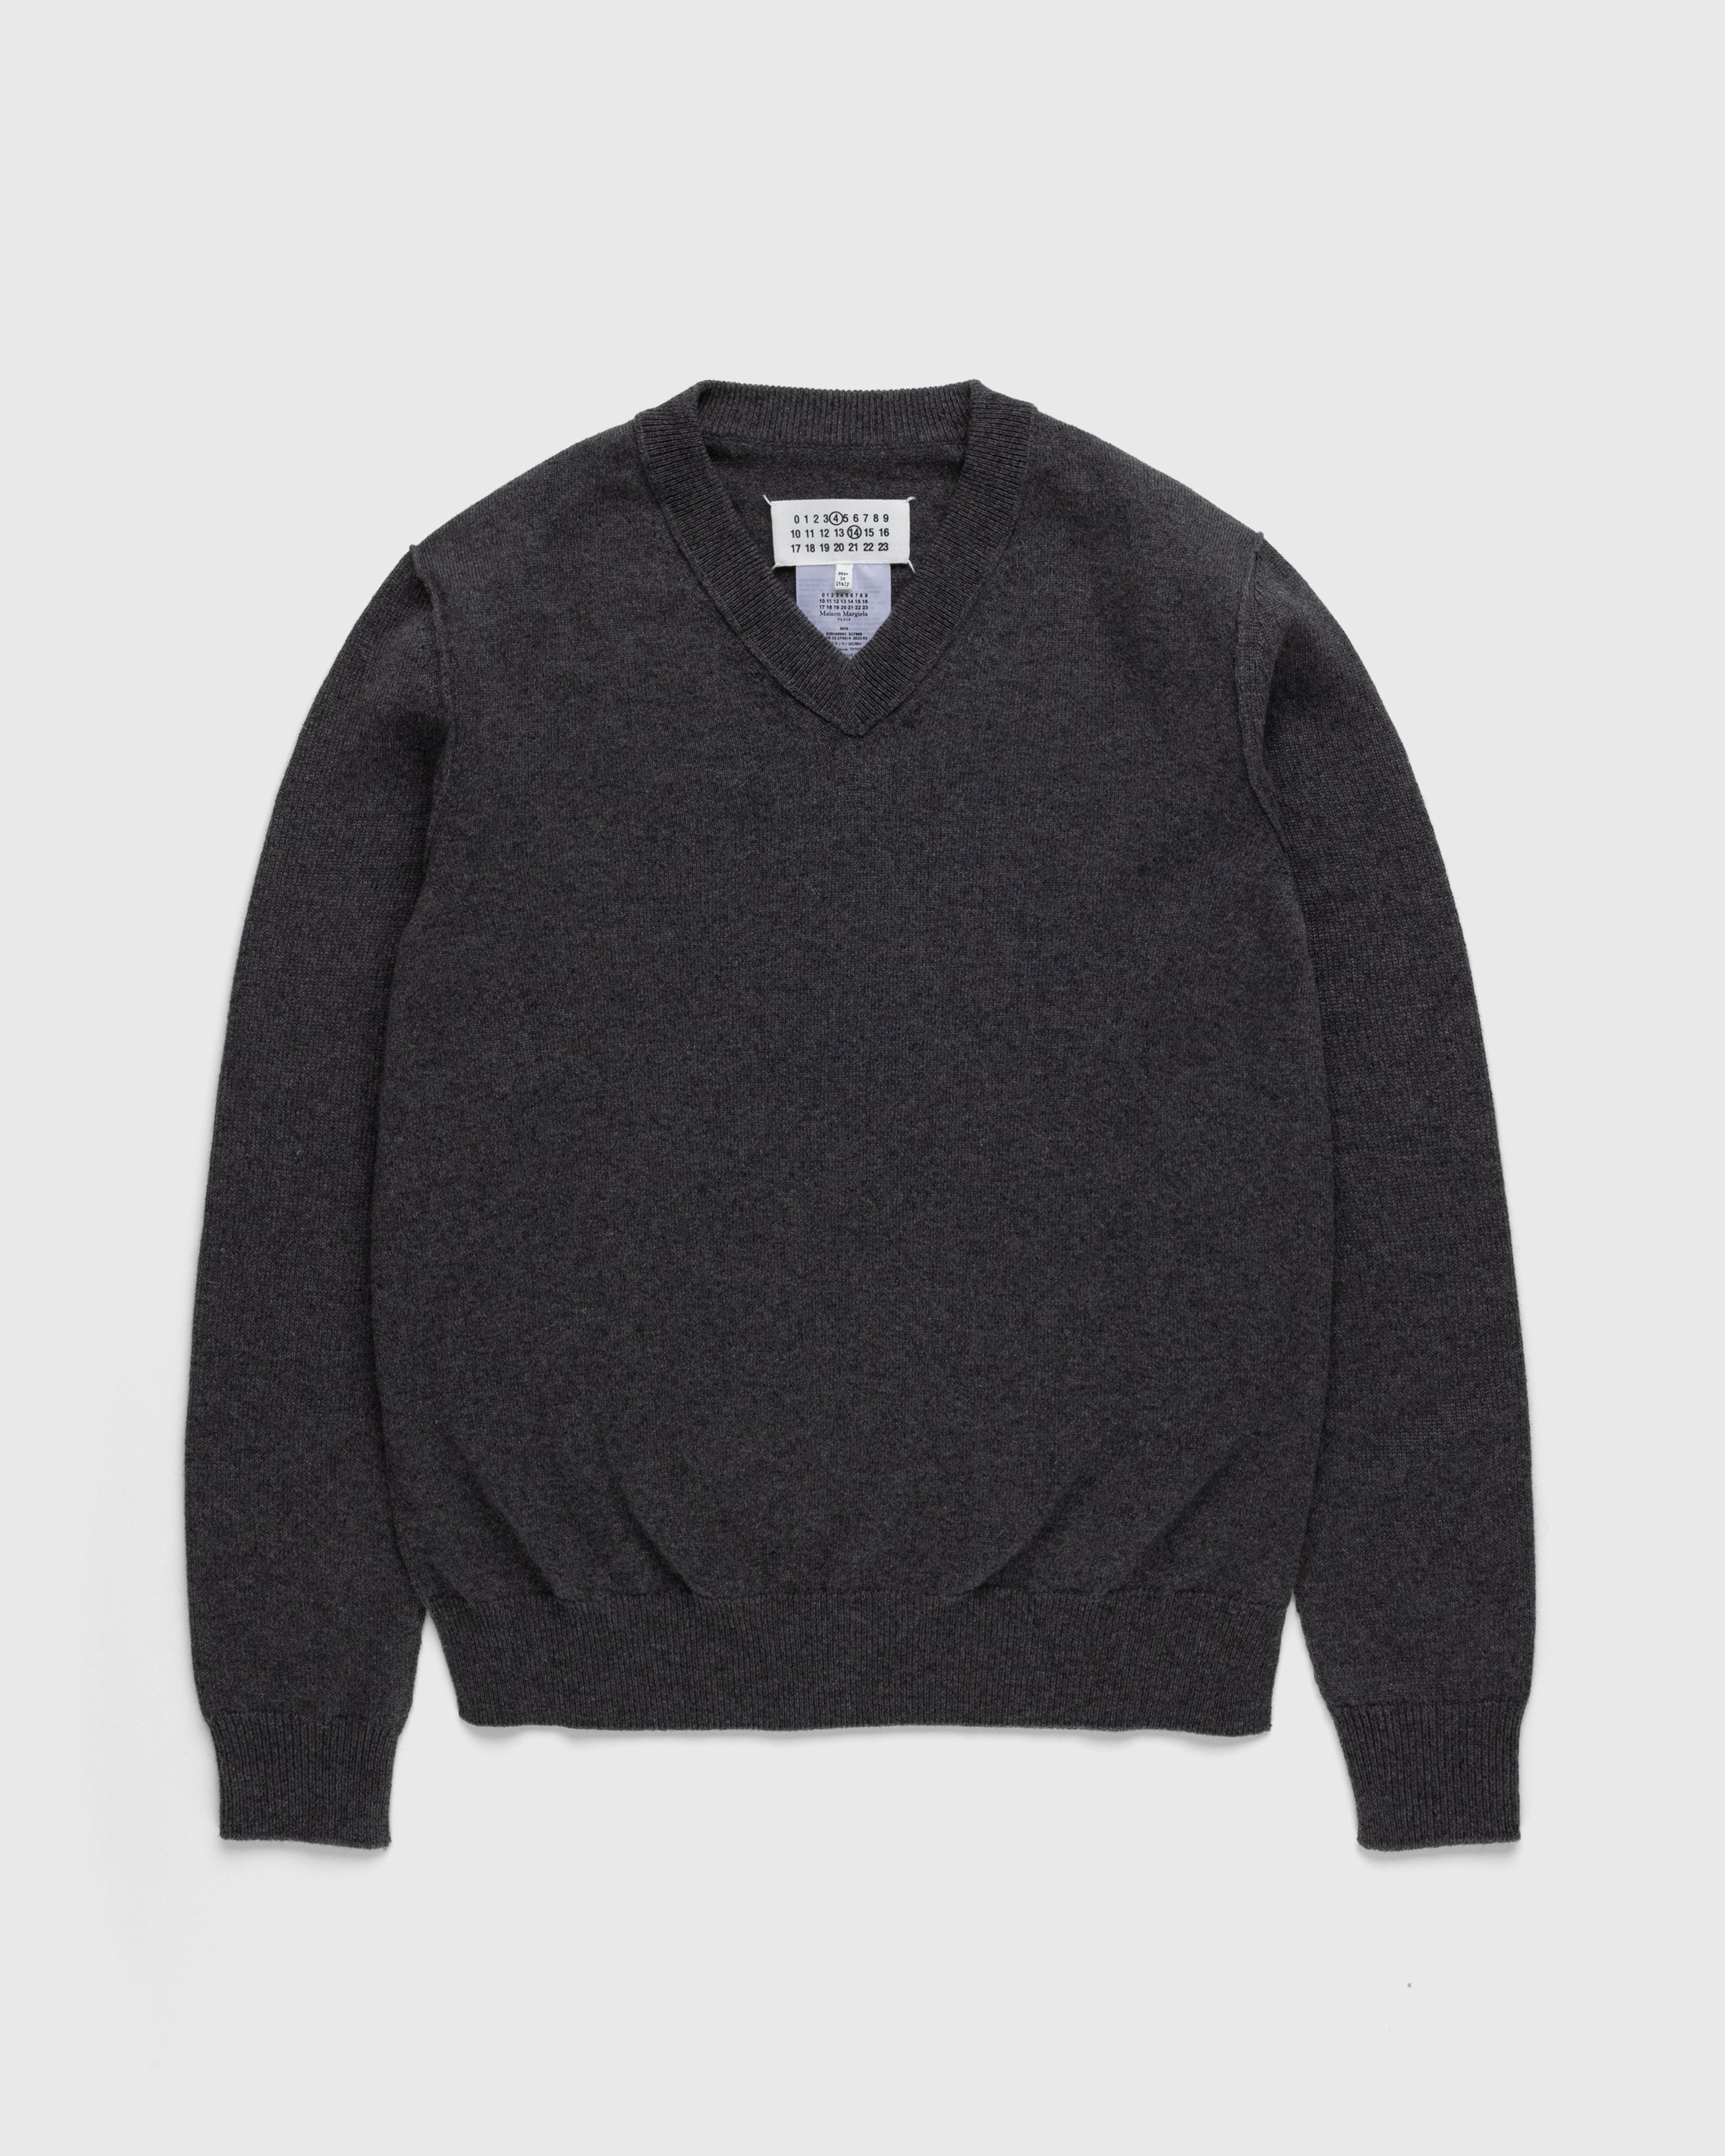 Maison Margiela Wool Sweater in Steel Grey for Men Blue Mens Clothing Sweaters and knitwear V-neck jumpers 